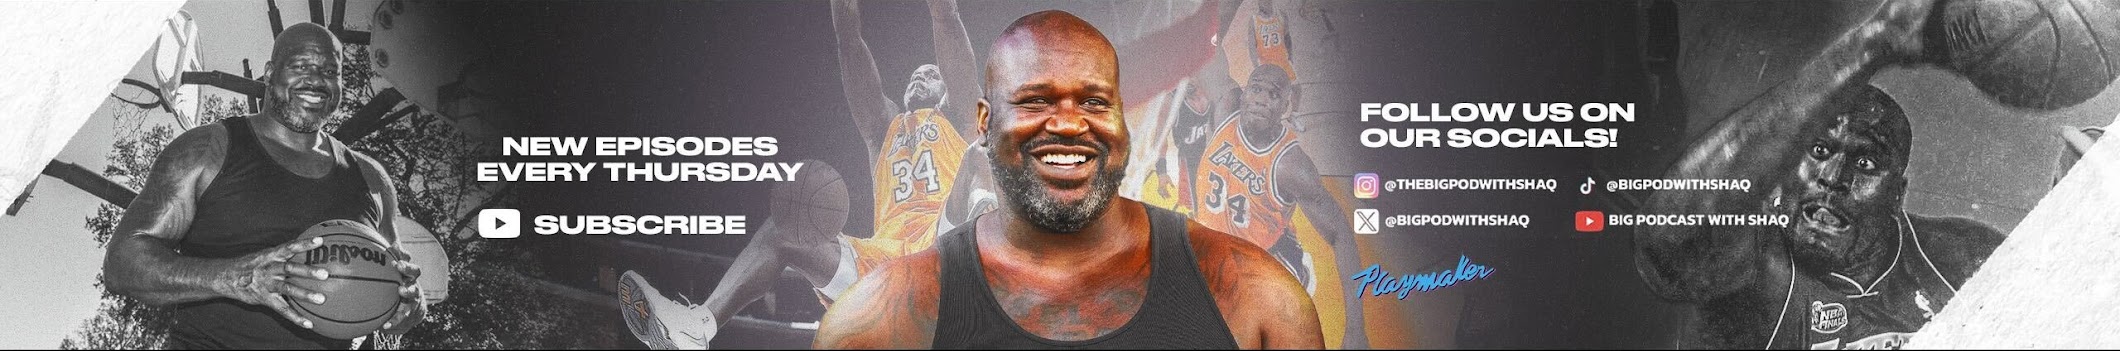 The Big Podcast with SHAQ